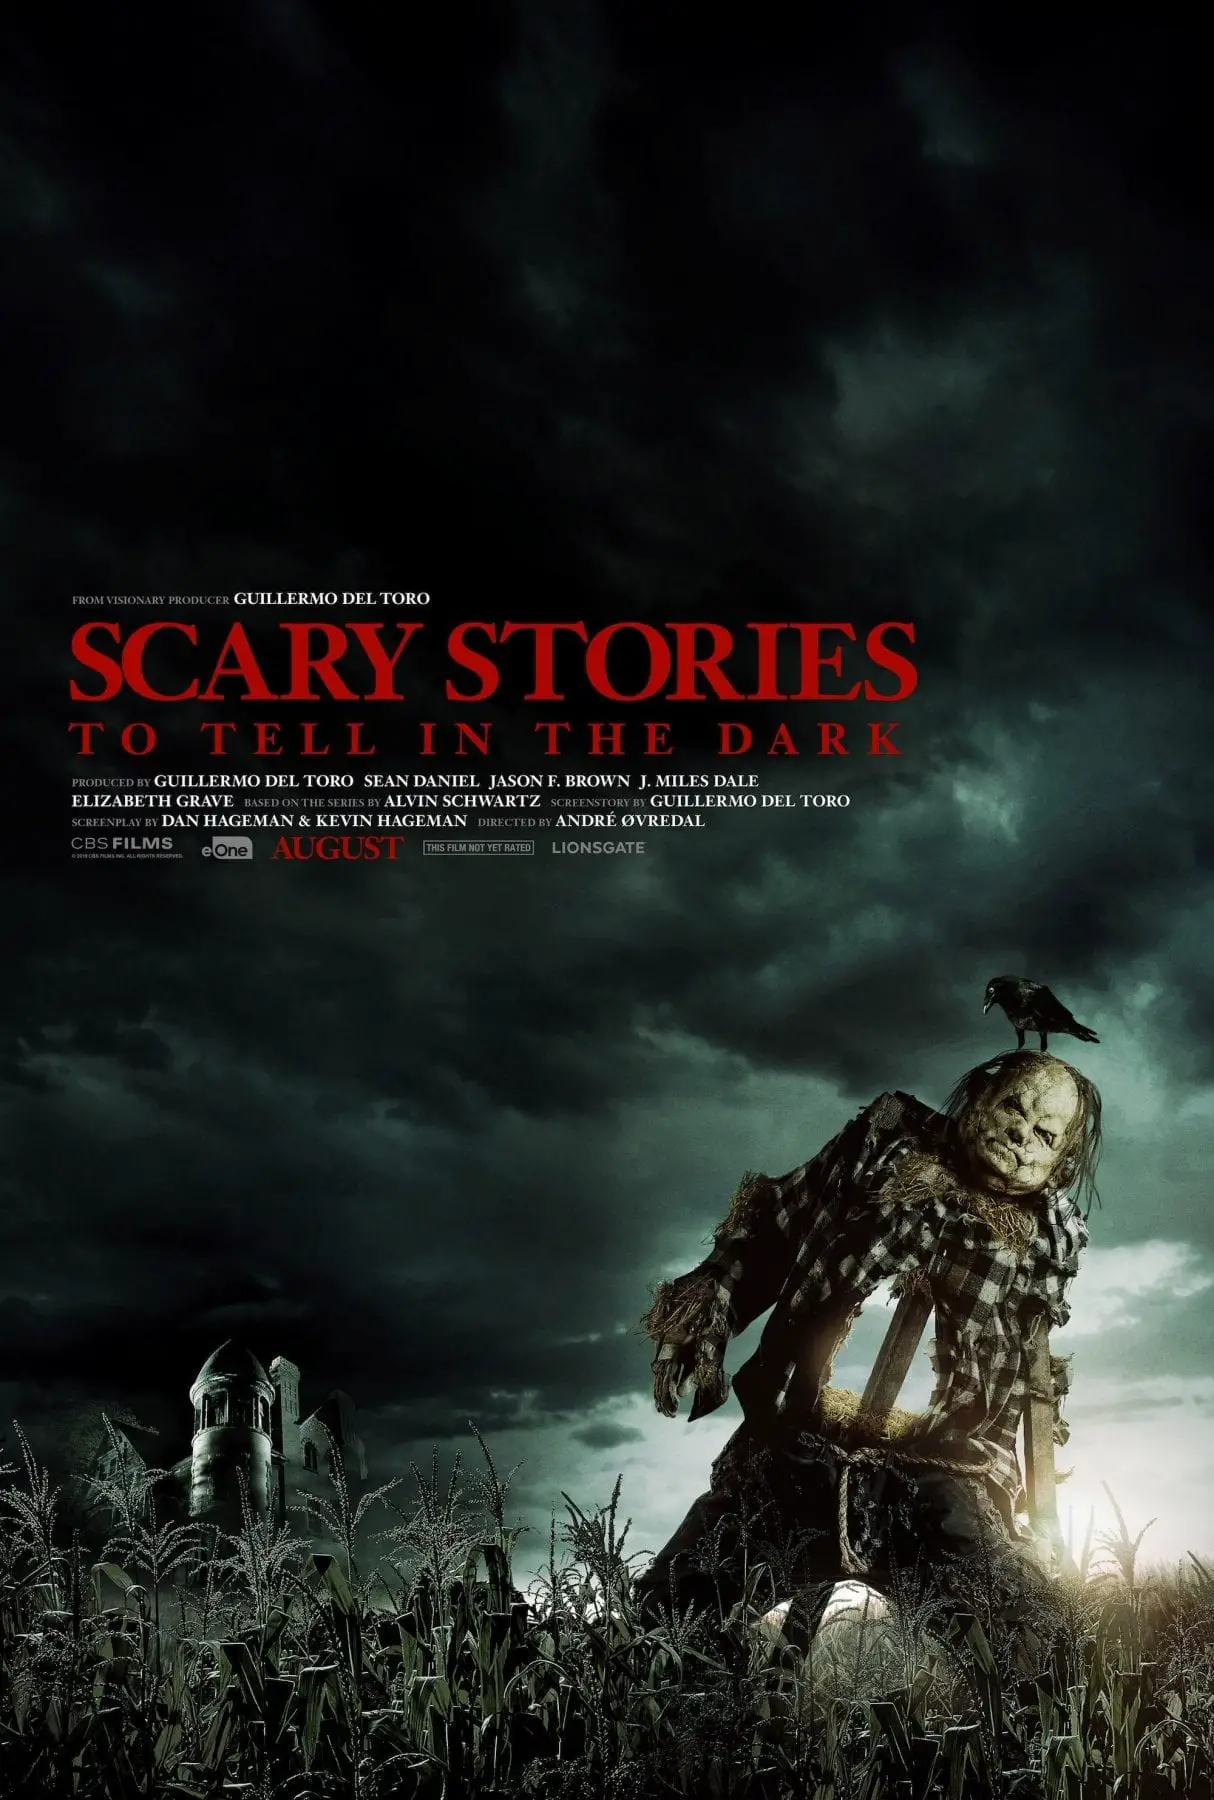 Scary Stories to Tell in the Dark upcoming film poster 